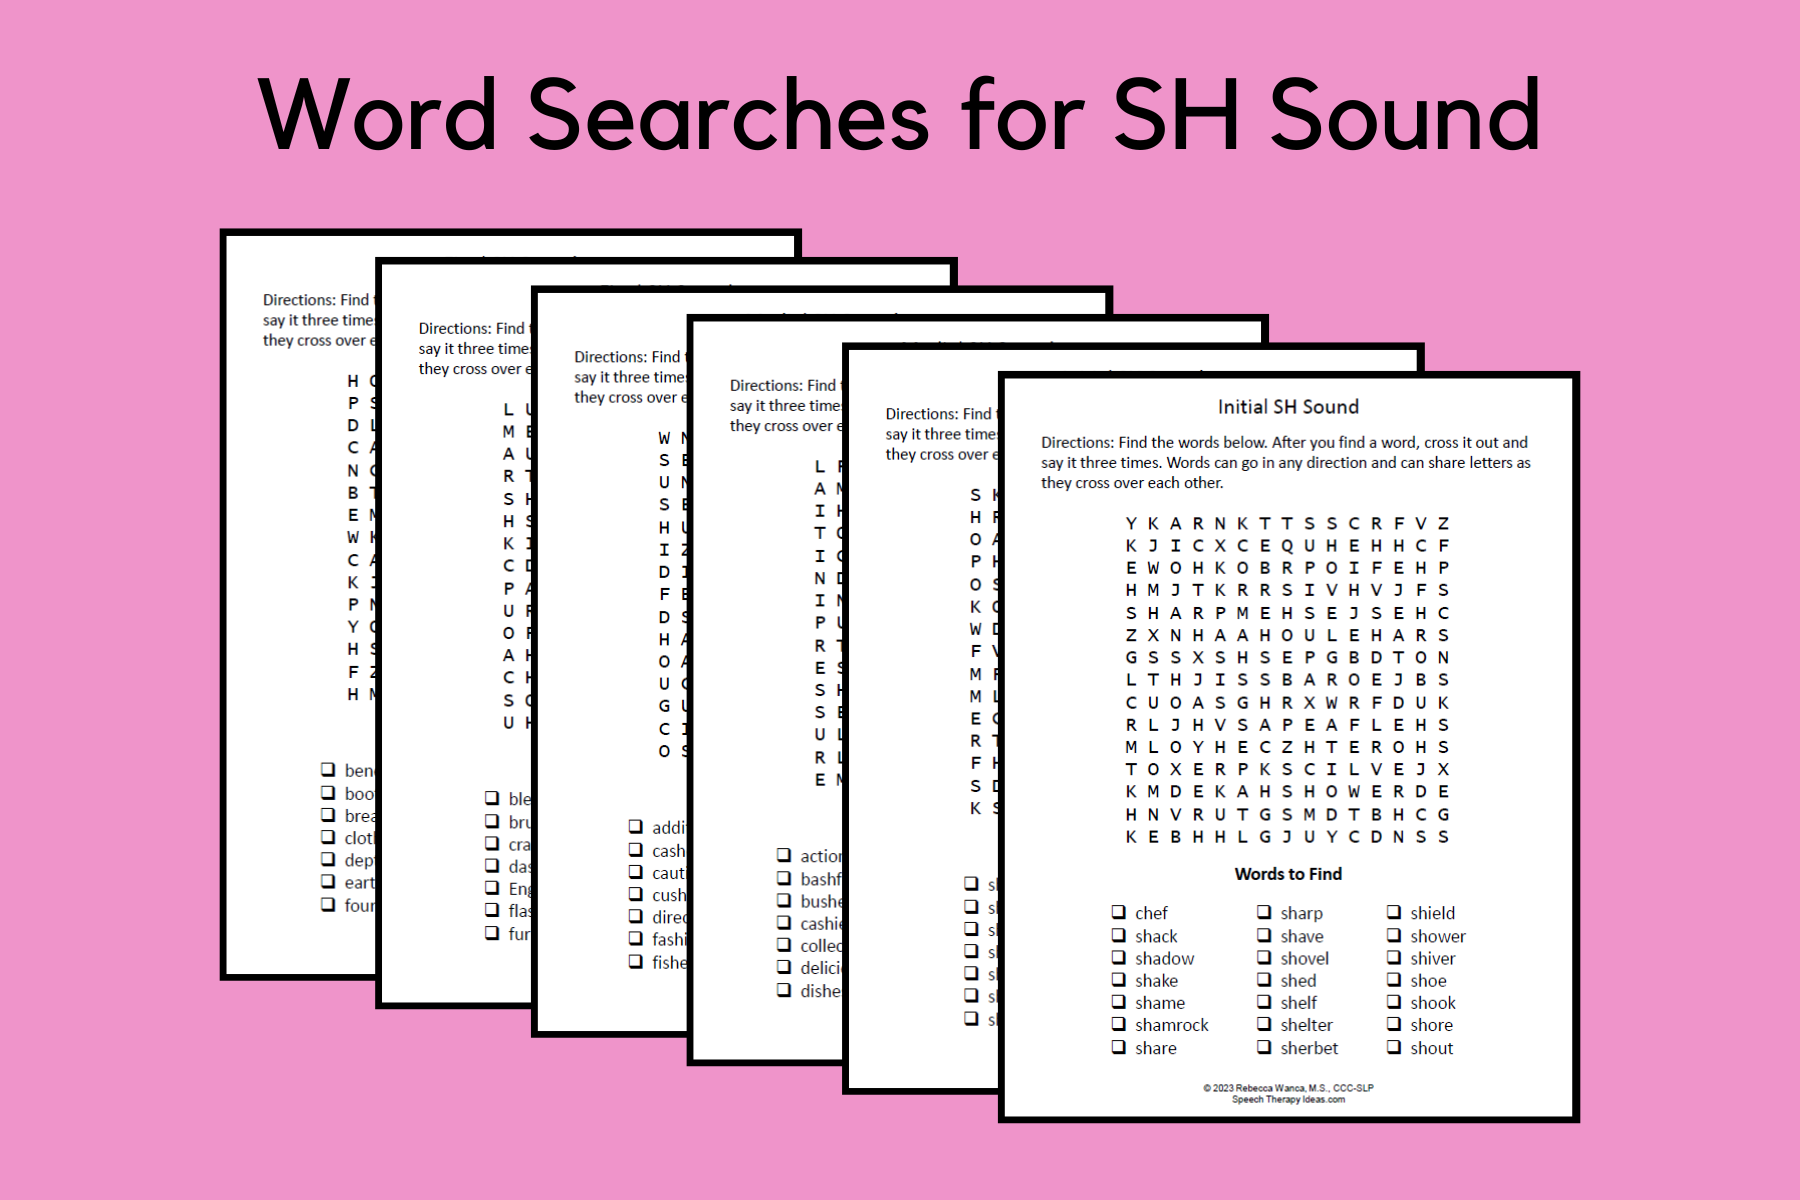 Word Searches for SH Sound